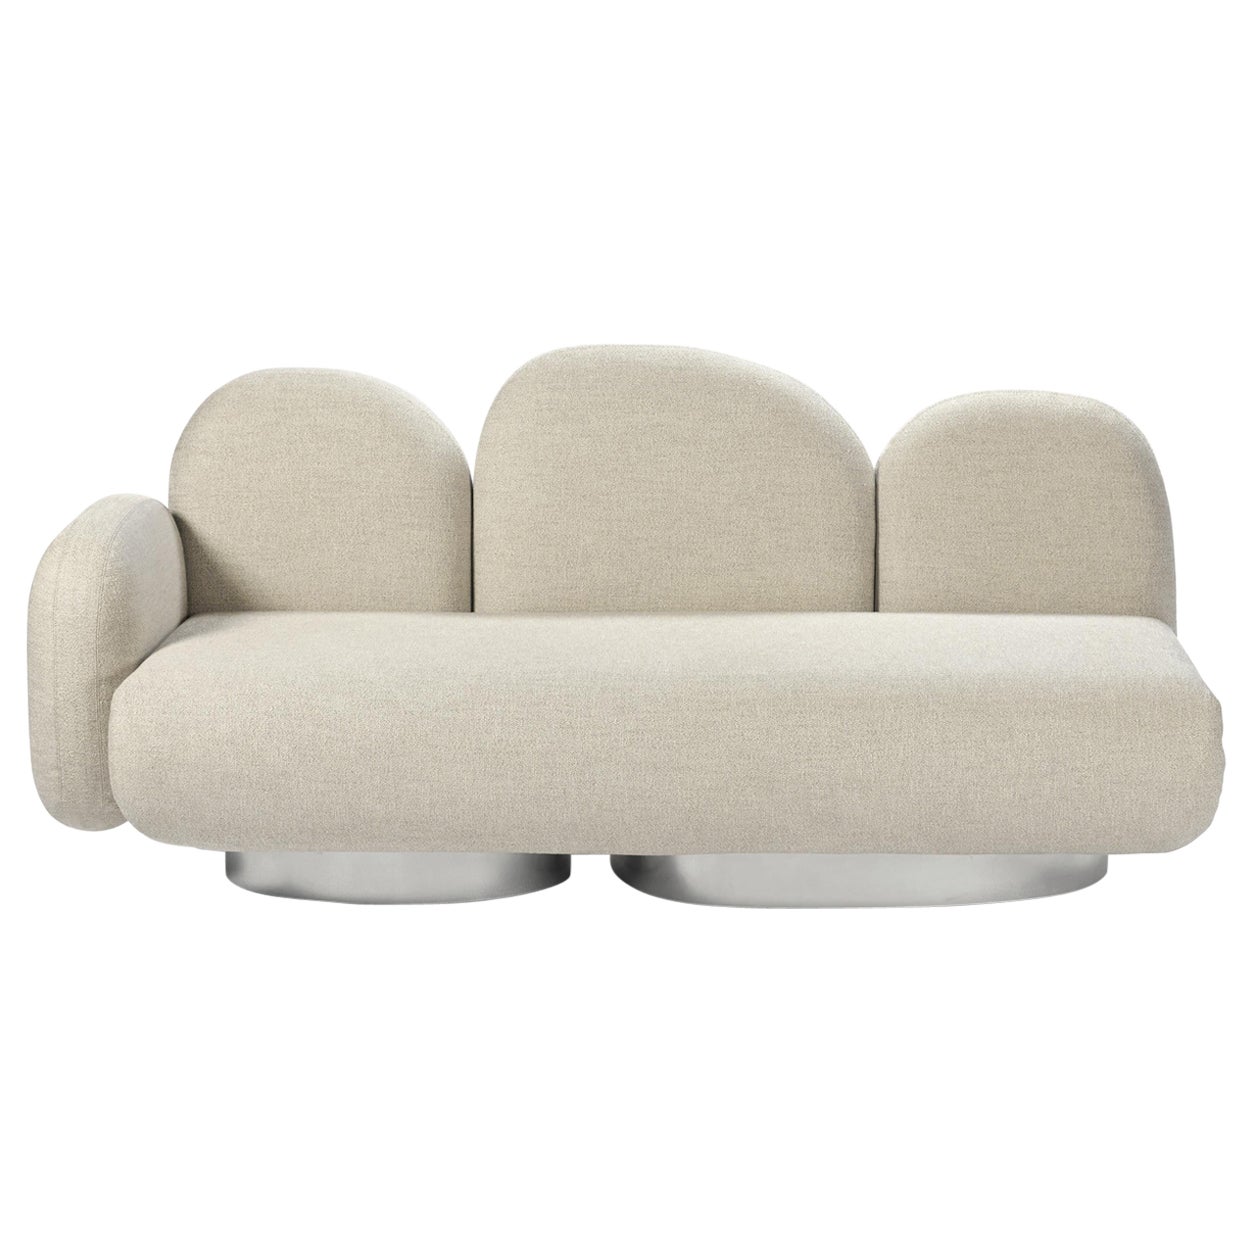 Contemporary Sofa 'Assemble' by Destroyers/Builders, 2 seaters + 1 armrest For Sale